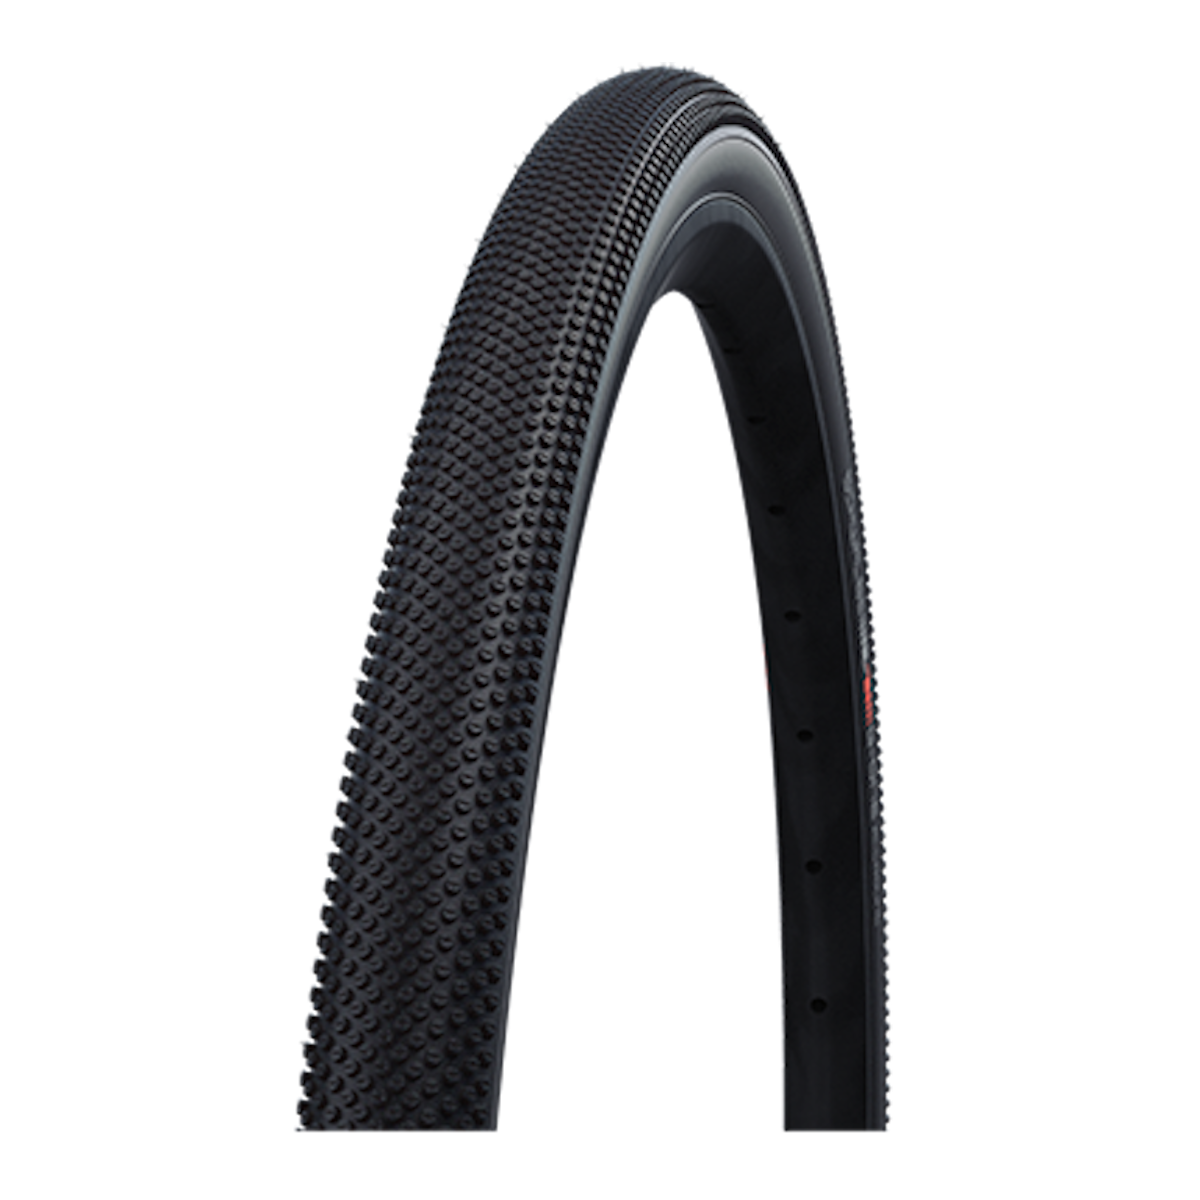 SCHWALBE G-ONE ALLROUND 700 X 40C tubeless tyre